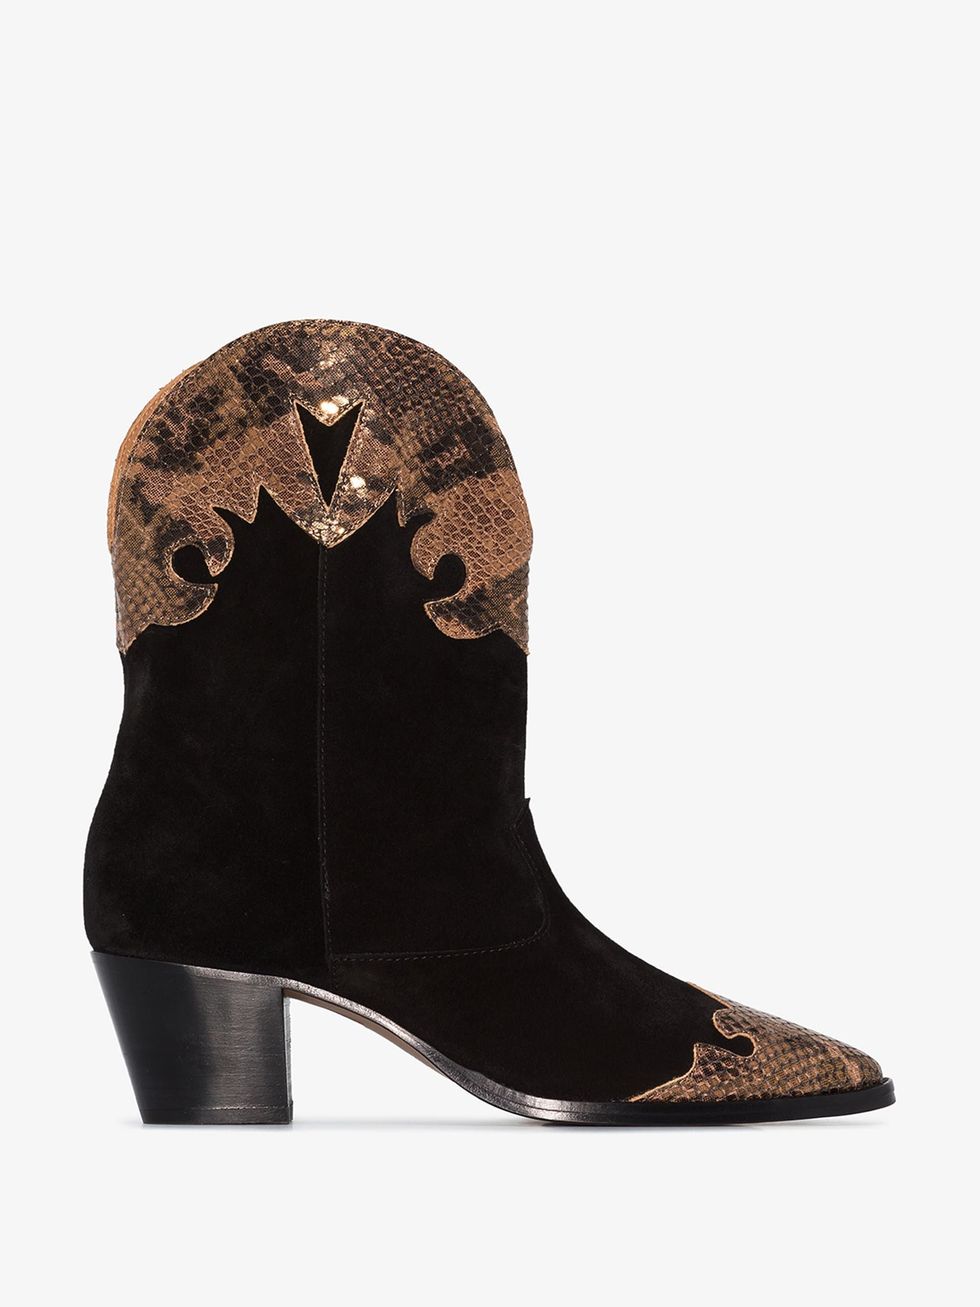 Shop the Look: Lovely Western Boots